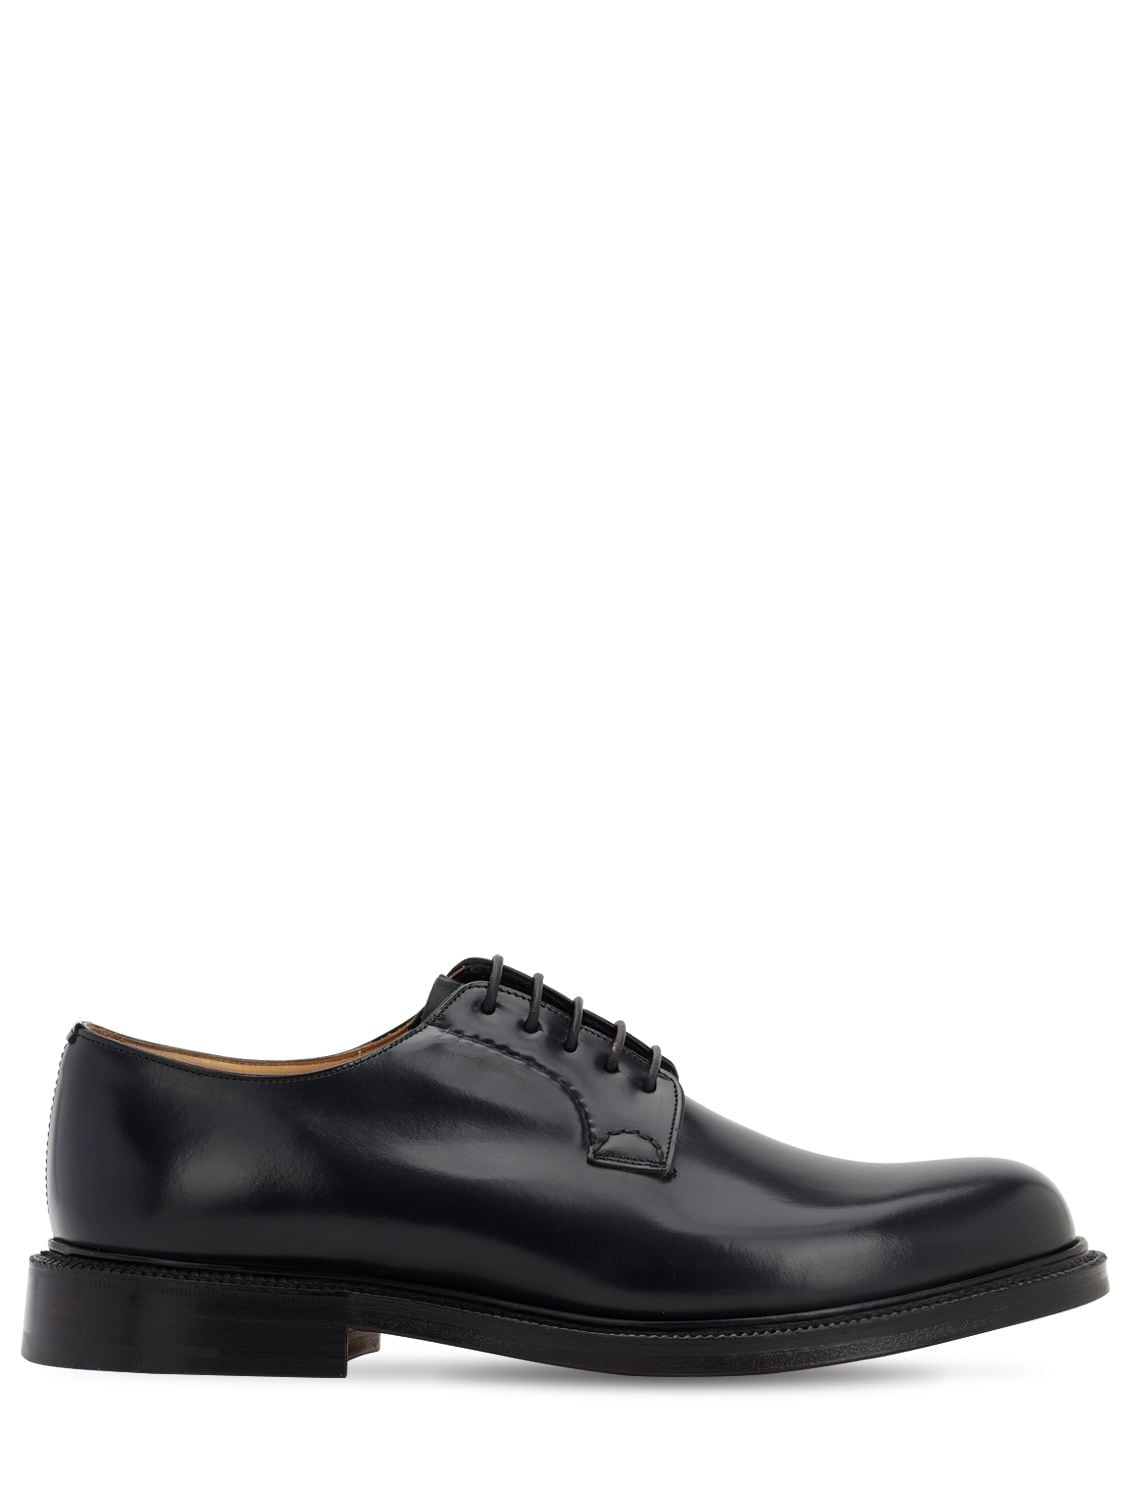 CHURCH'S SHANNON LEATHER LACE-UP SHOES,71IR60007-RJBBQK01